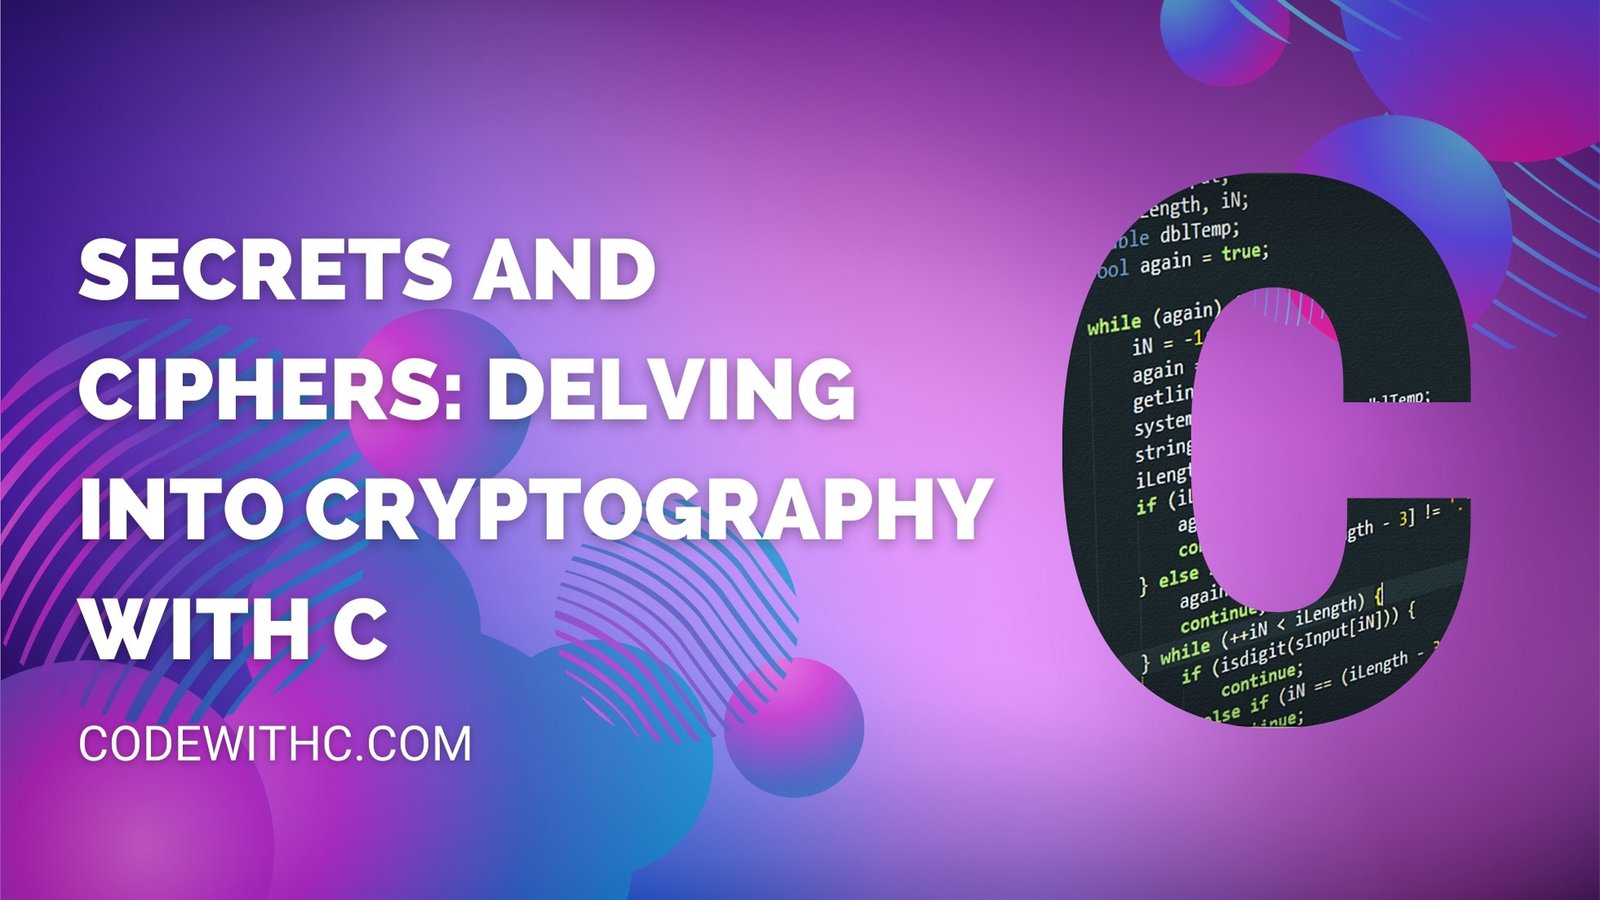 Secrets and Ciphers Delving into Cryptography with C